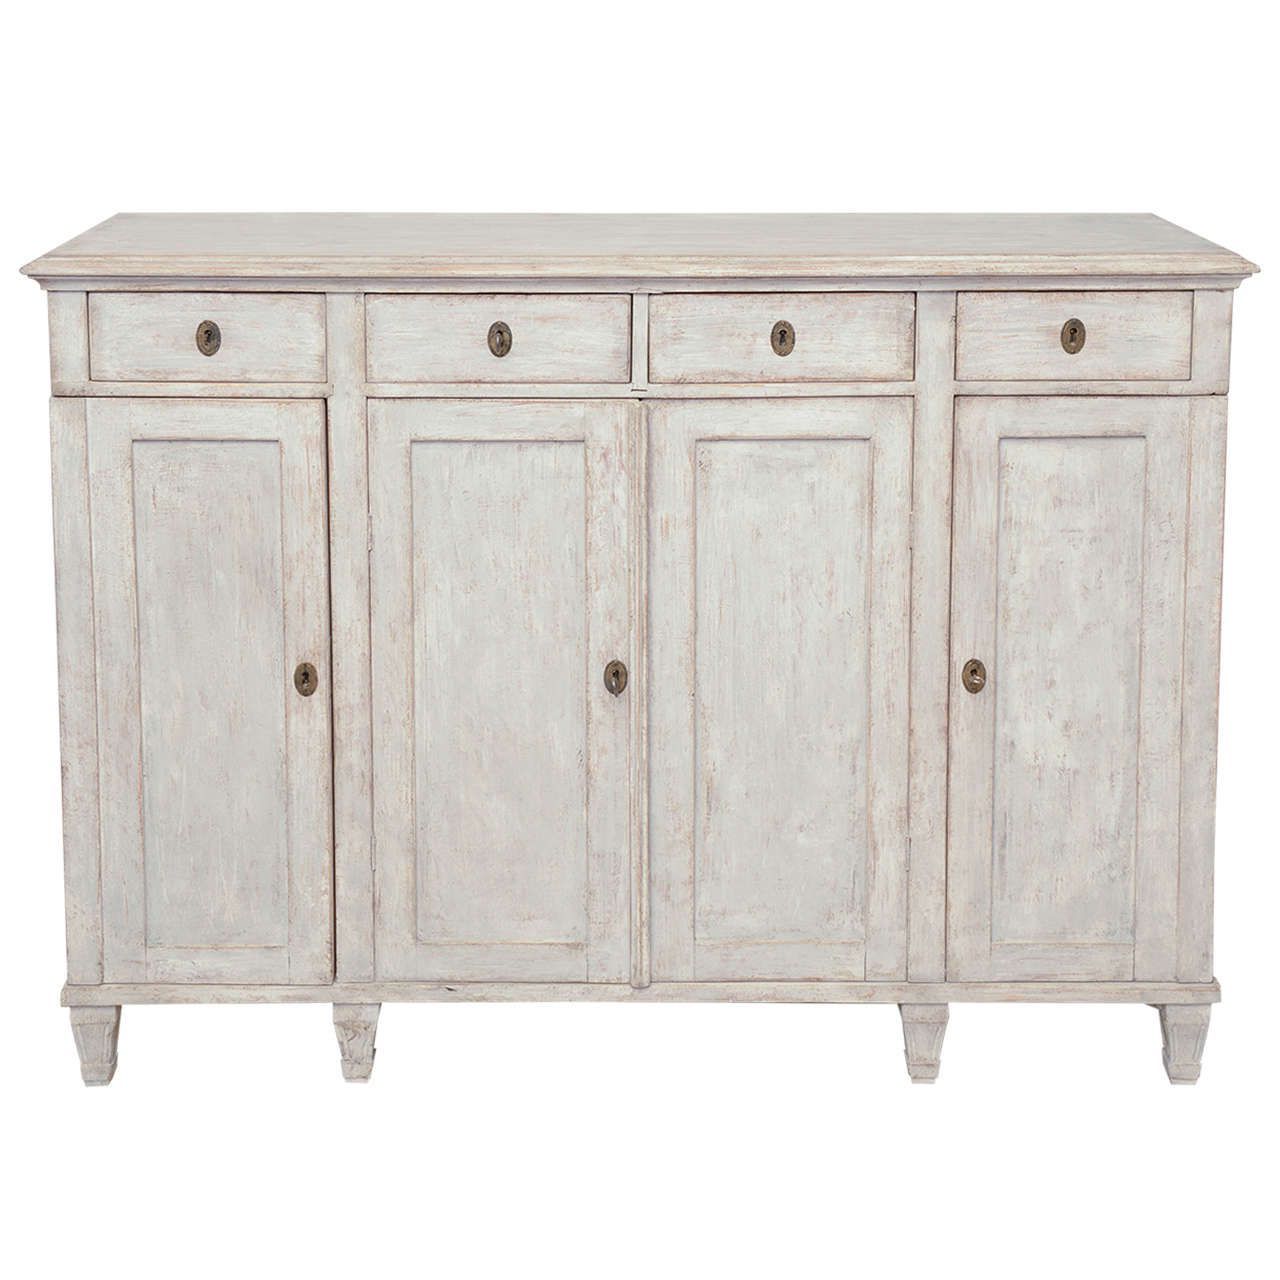 19th Century Antique Swedish, Gustavian Painted Sideboard With Regard To Phyllis Sideboards (View 5 of 20)